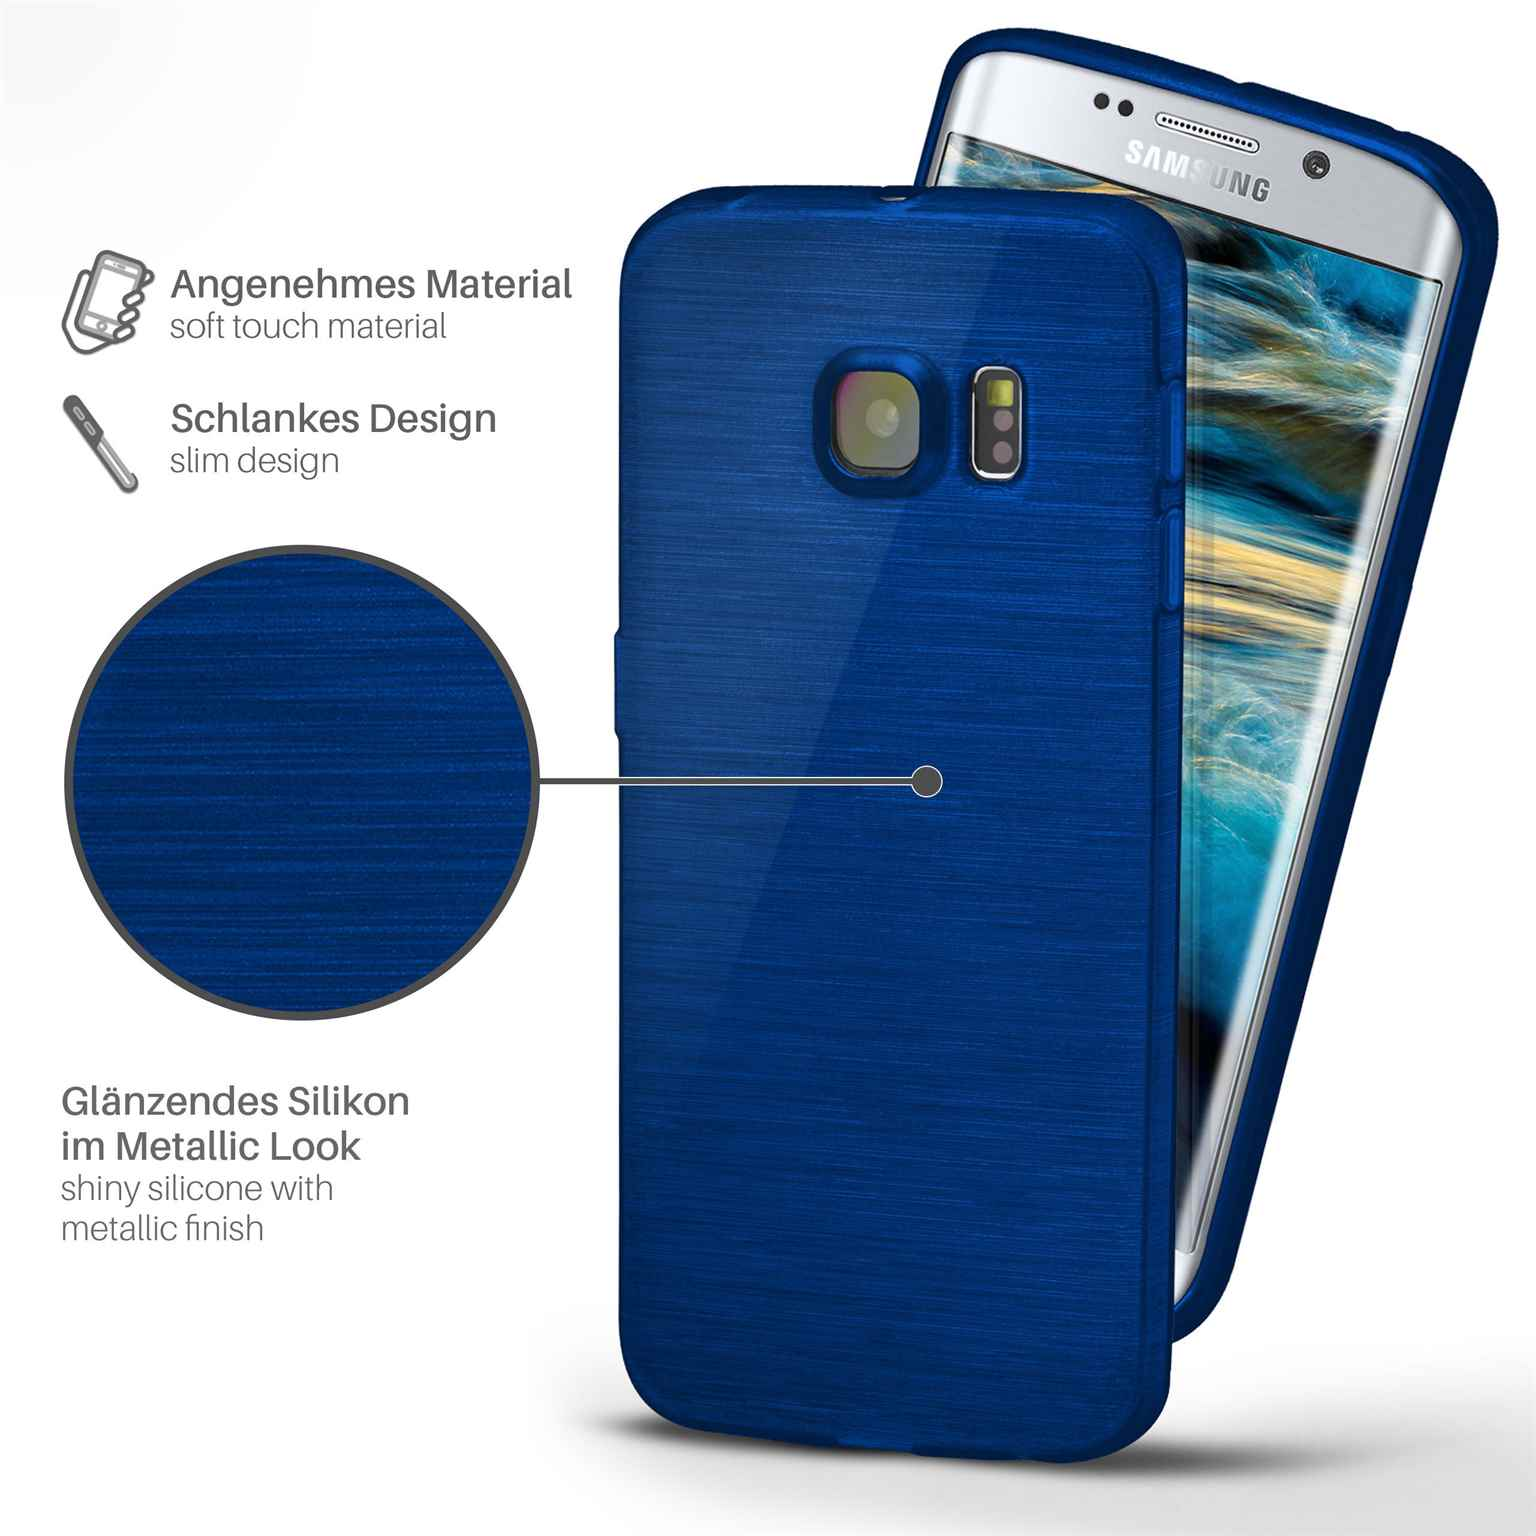 Navy-Blue Galaxy Backcover, MOEX Samsung, Case, S6 Brushed Edge,